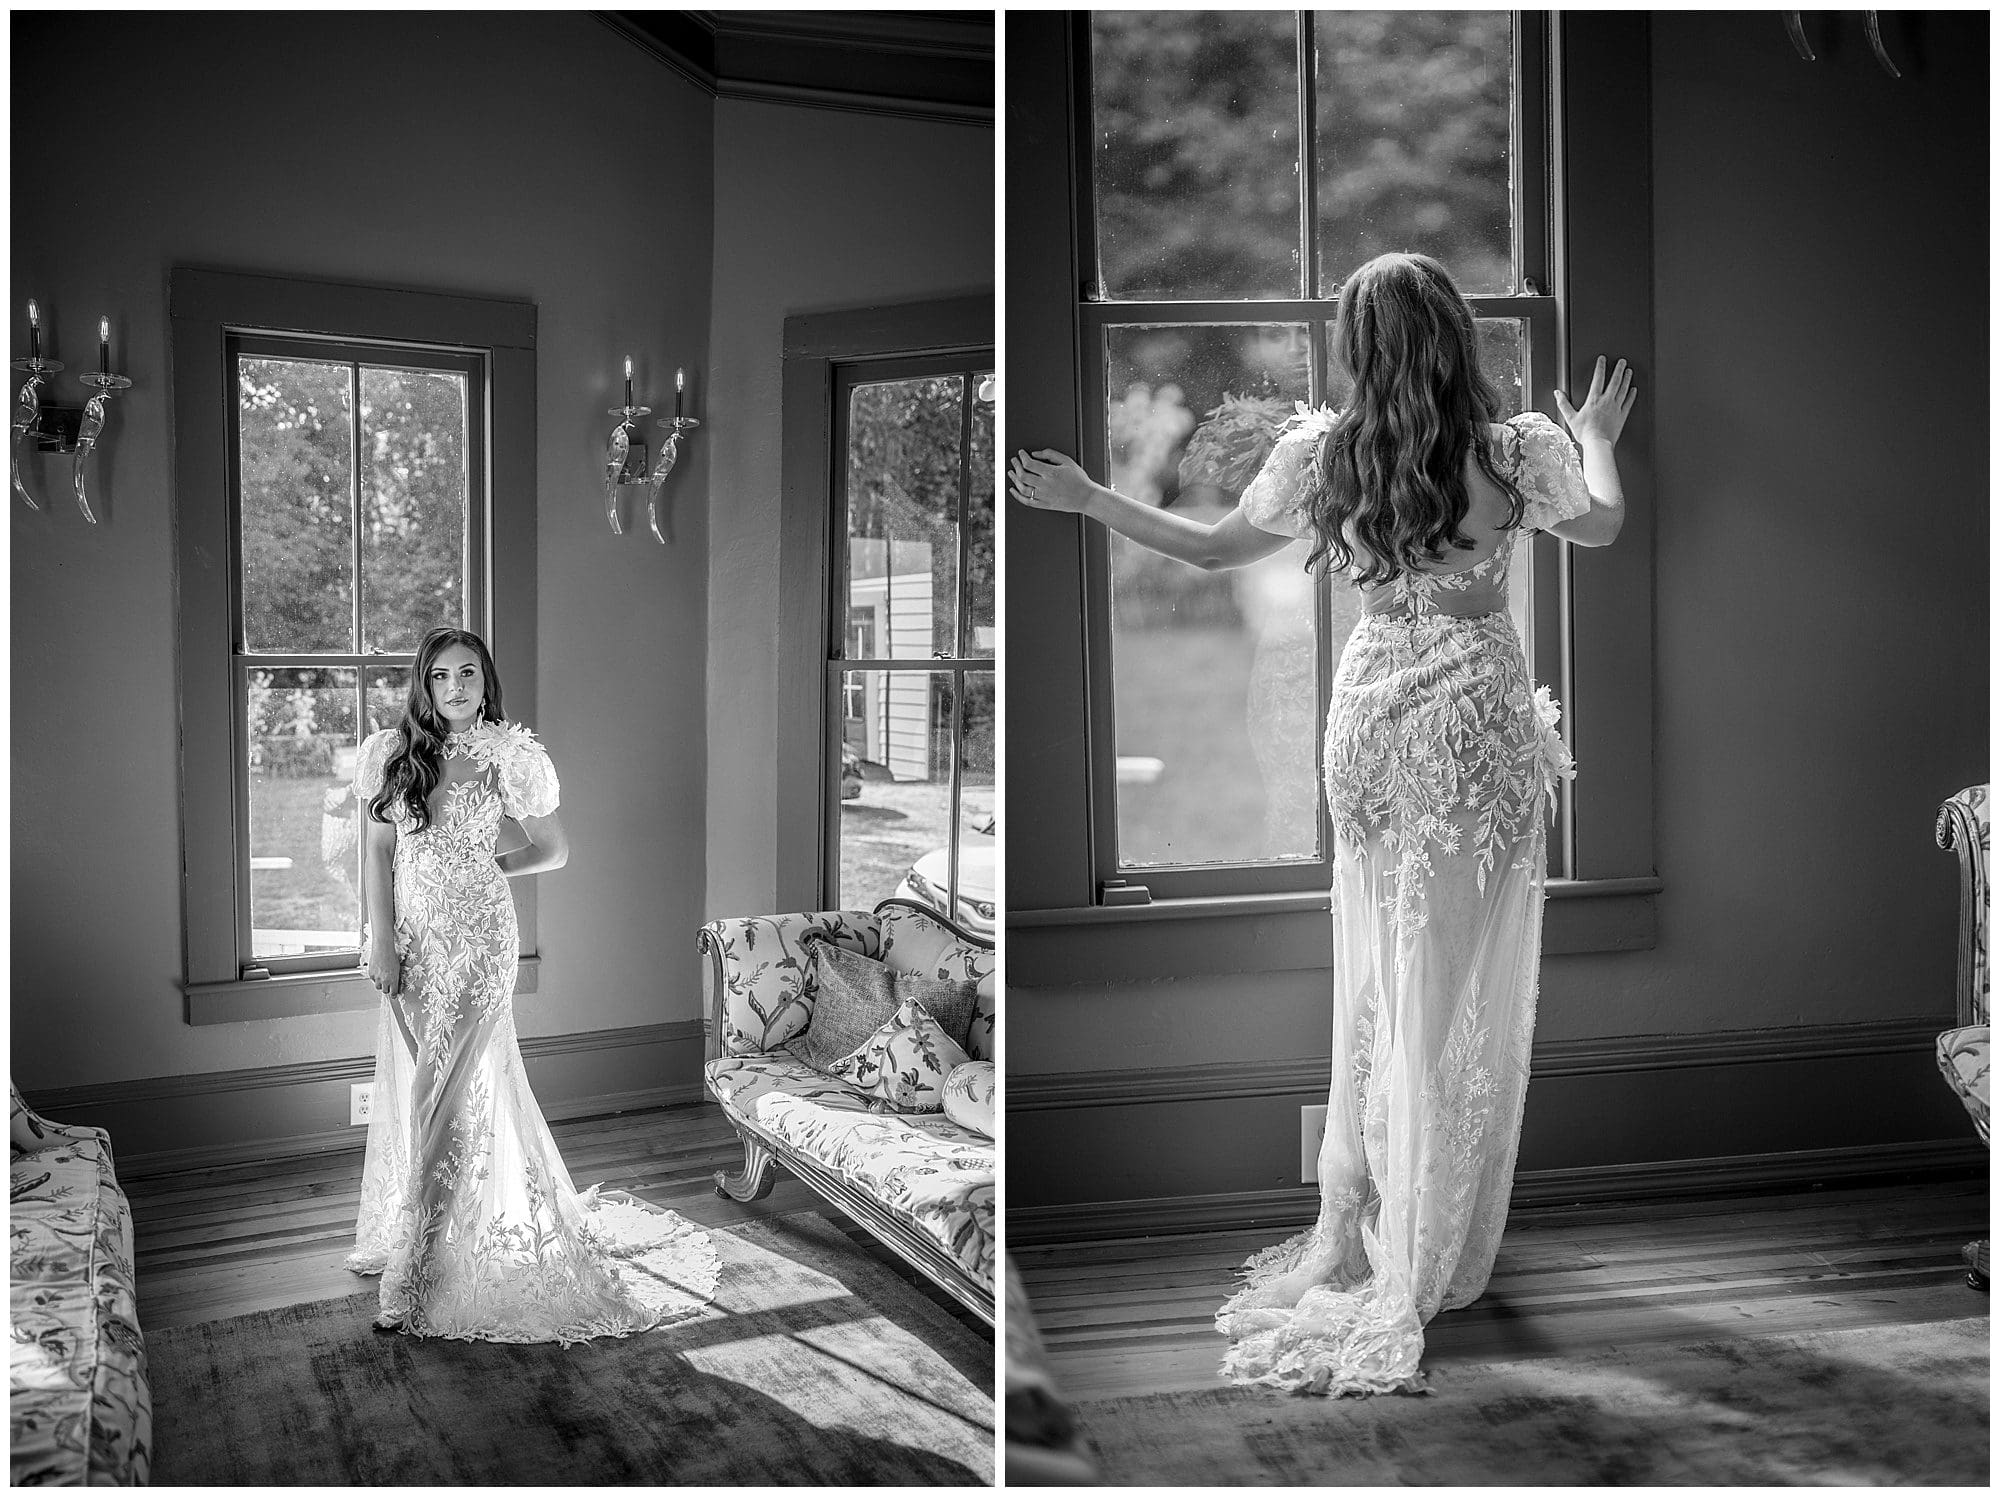 Two black and white photos of a bride in a wedding dress.